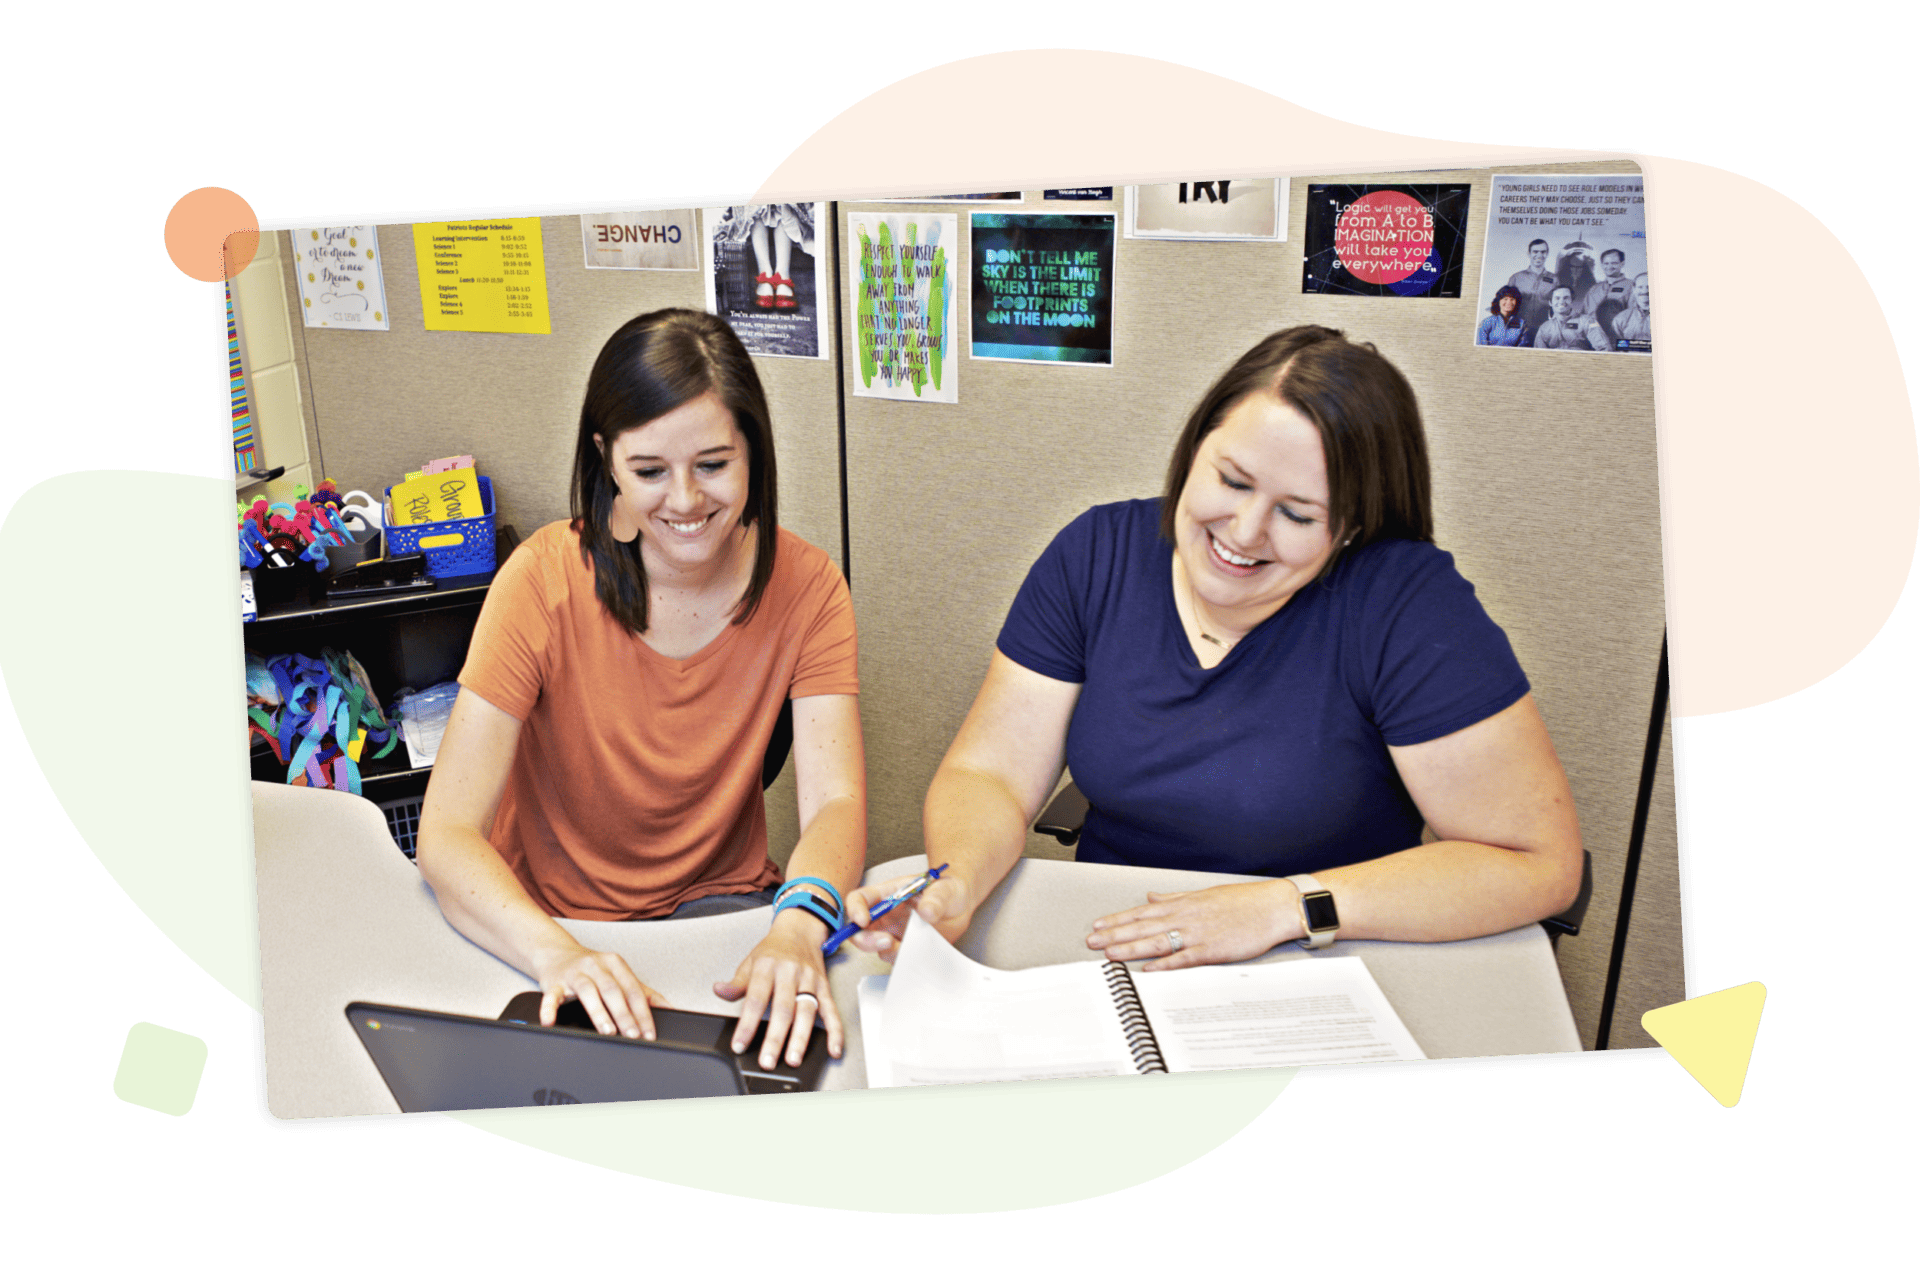 Two math teachers smiling and working together at a desk with a laptop and notebook, surrounded by colorful decorations and posters.